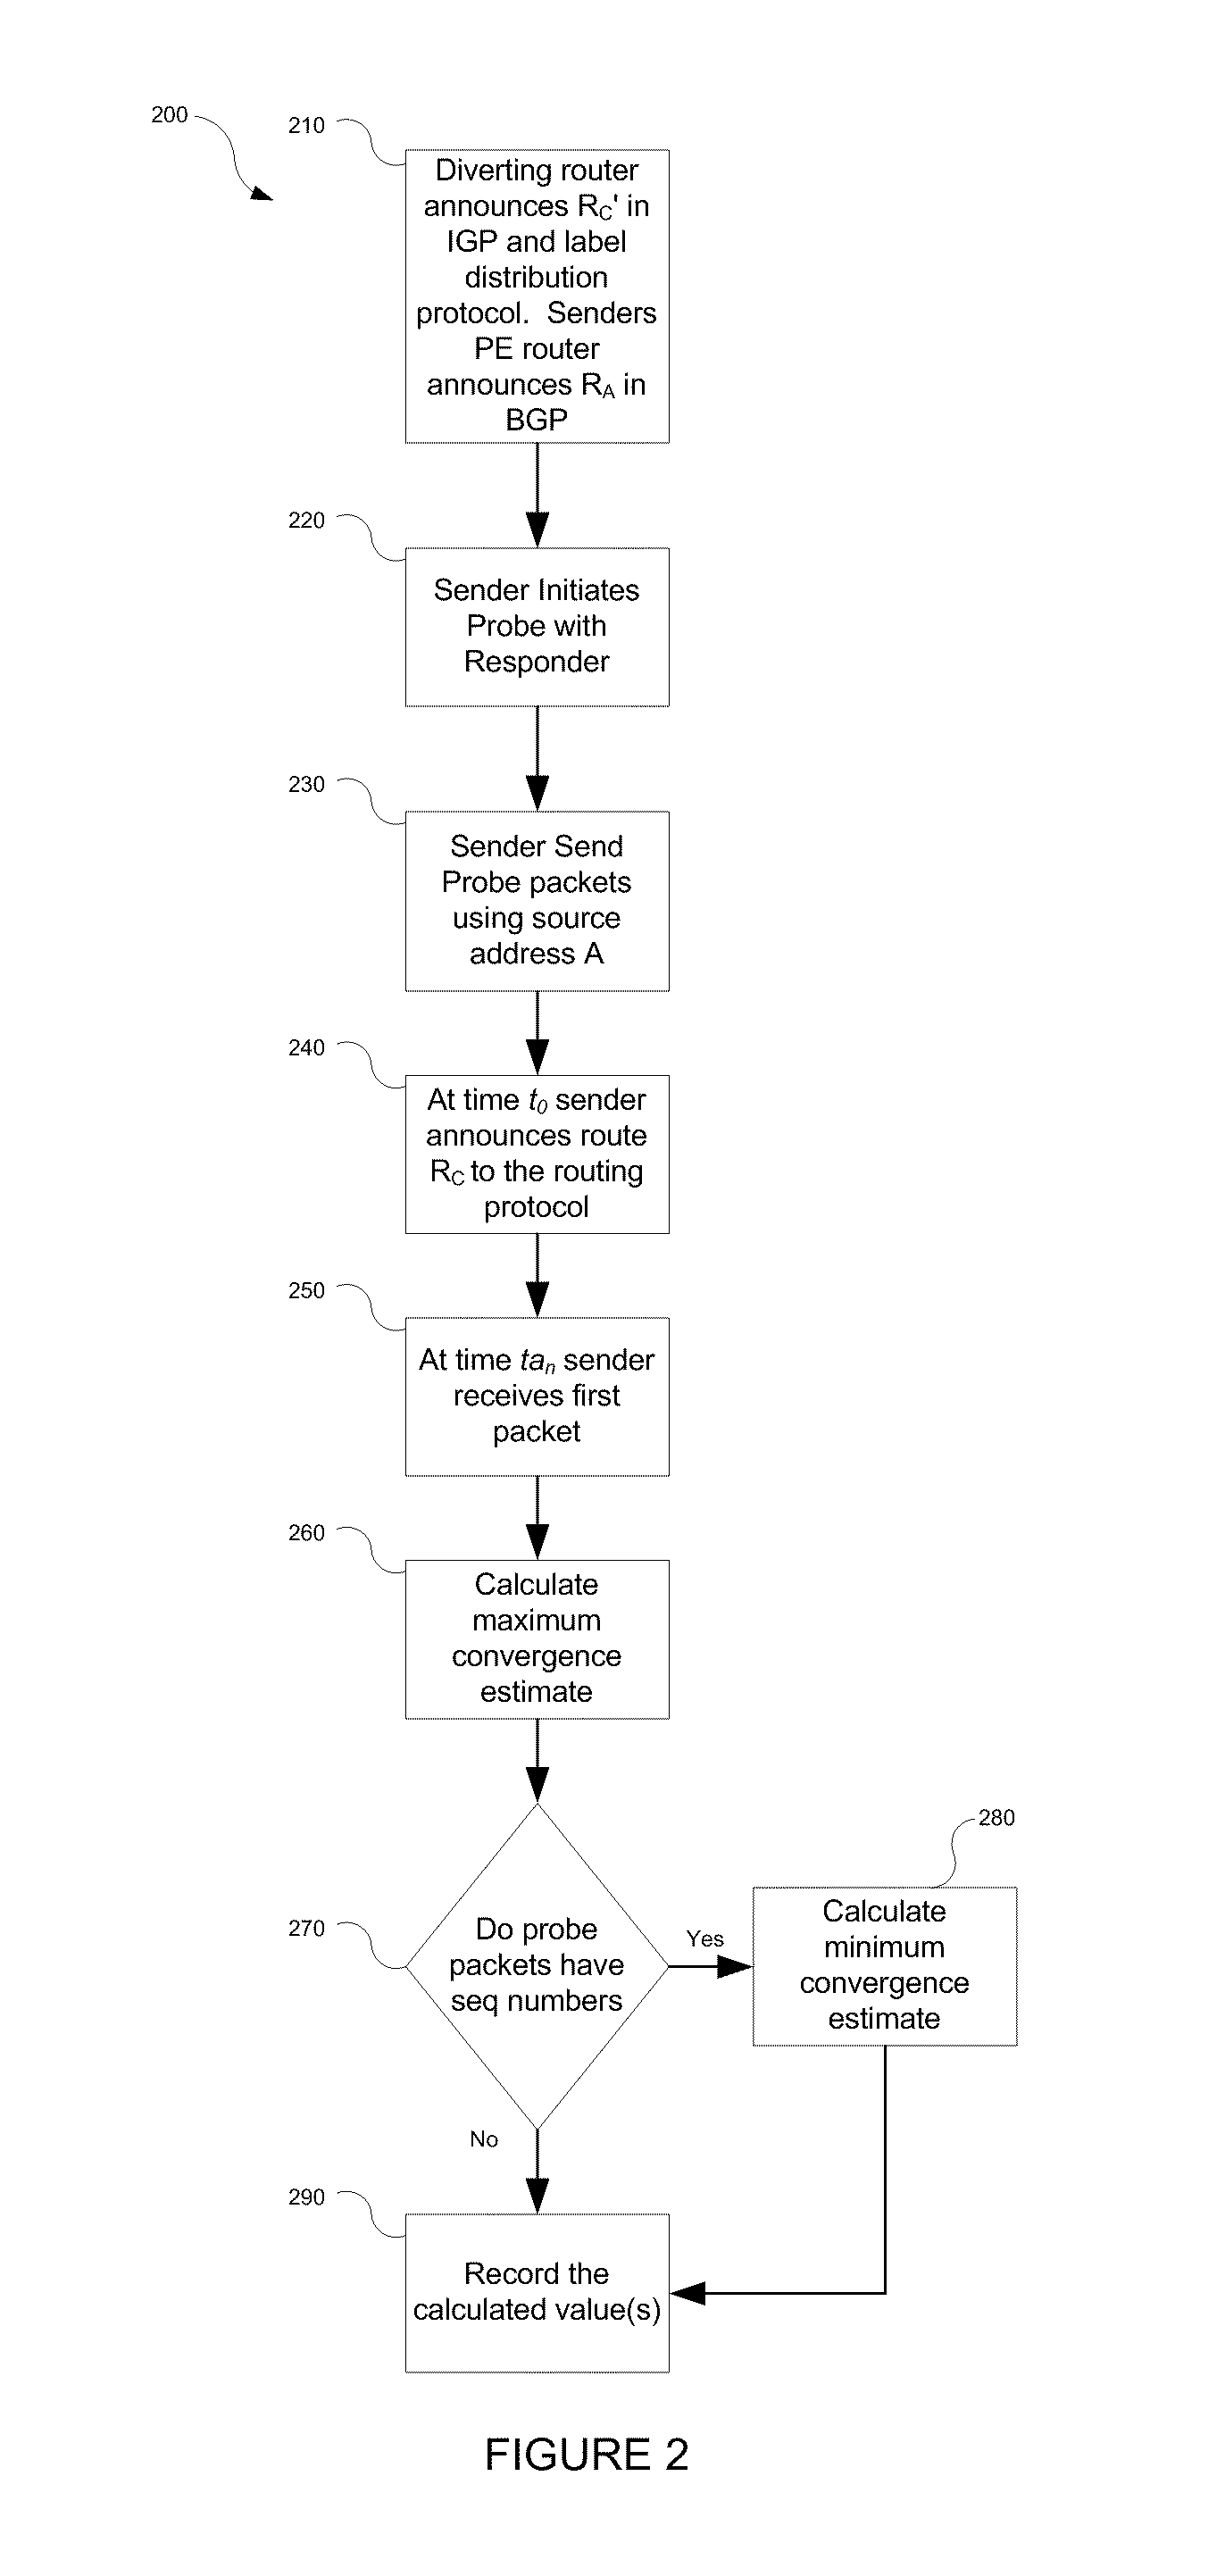 Apparatus and method for determining a service interruption time measurement